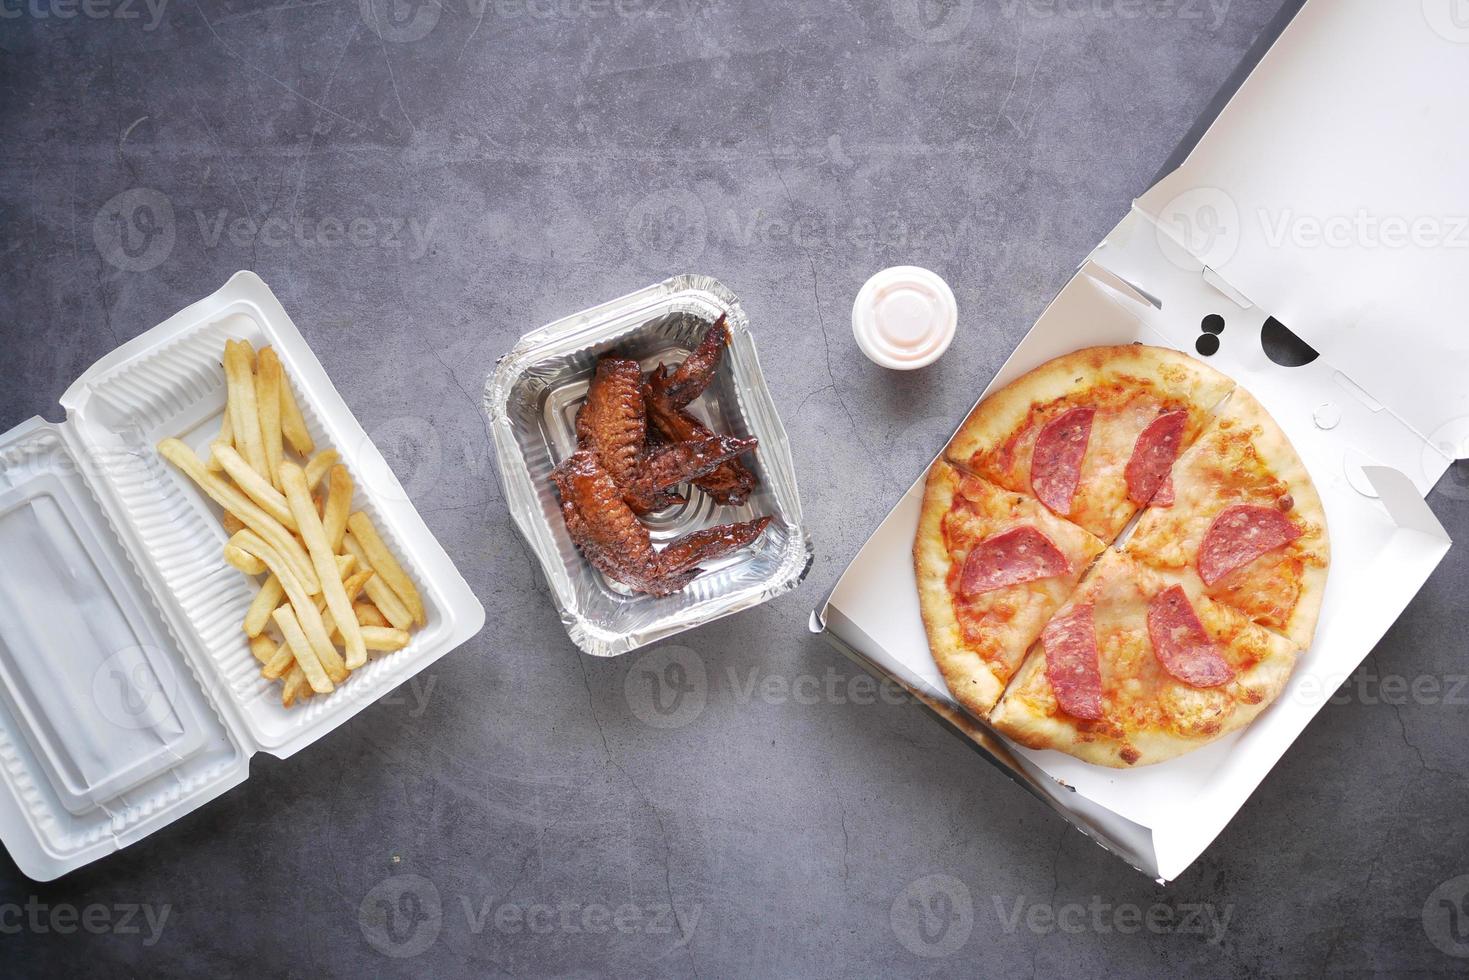 junk foods on a take away box on table photo